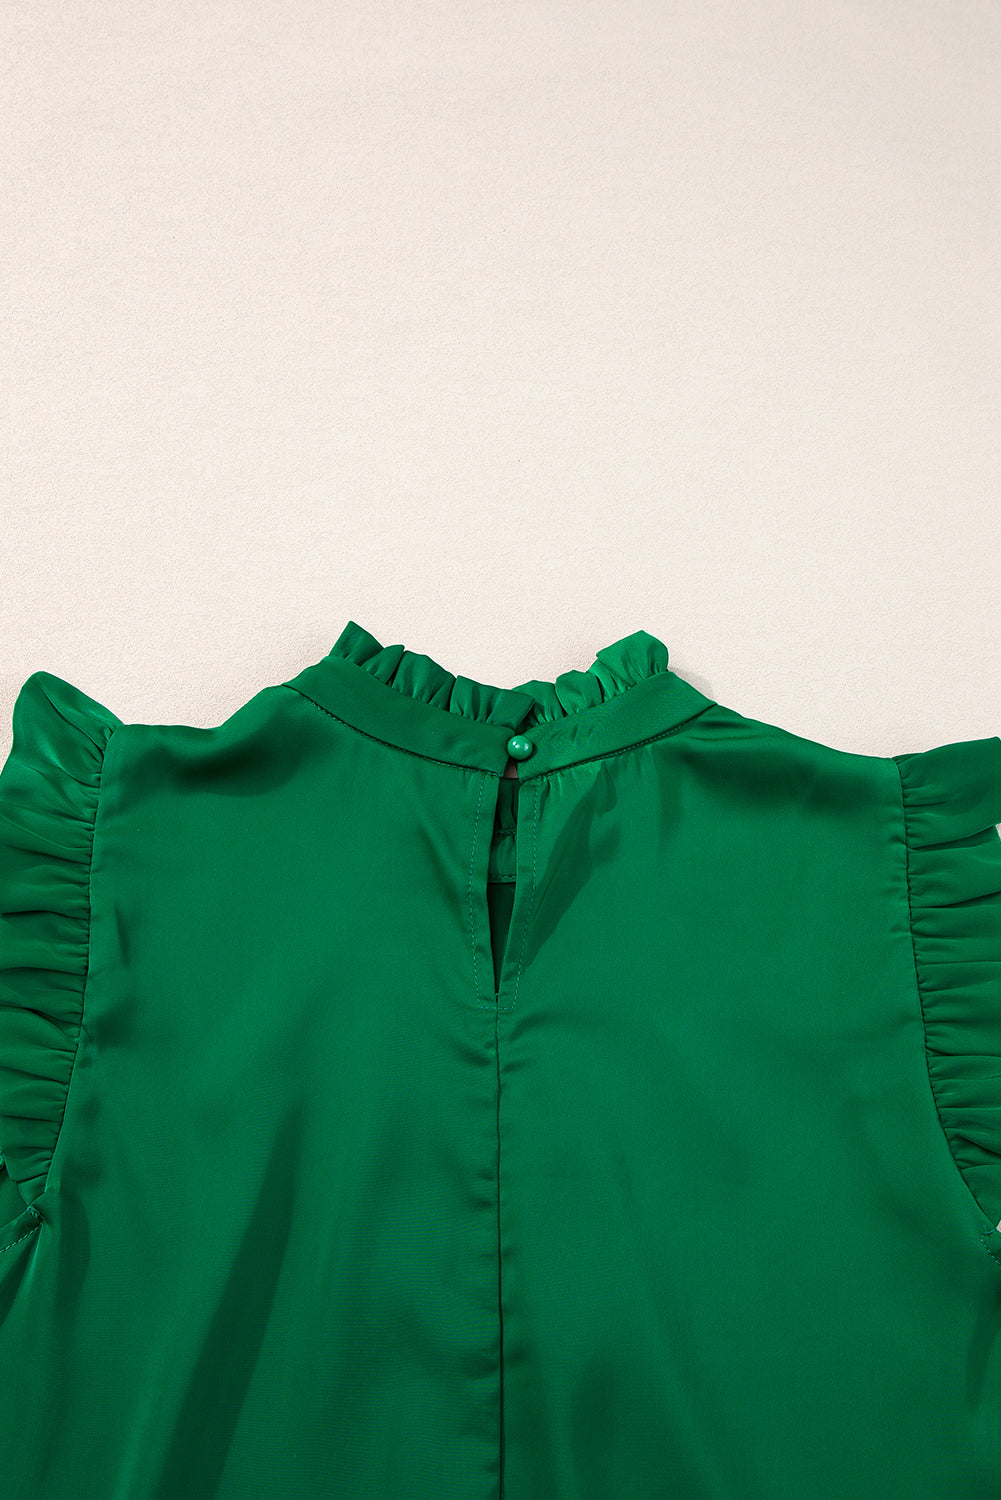 Bright Green Pleated Mock Neck Frilled Trim Sleeveless Top-10